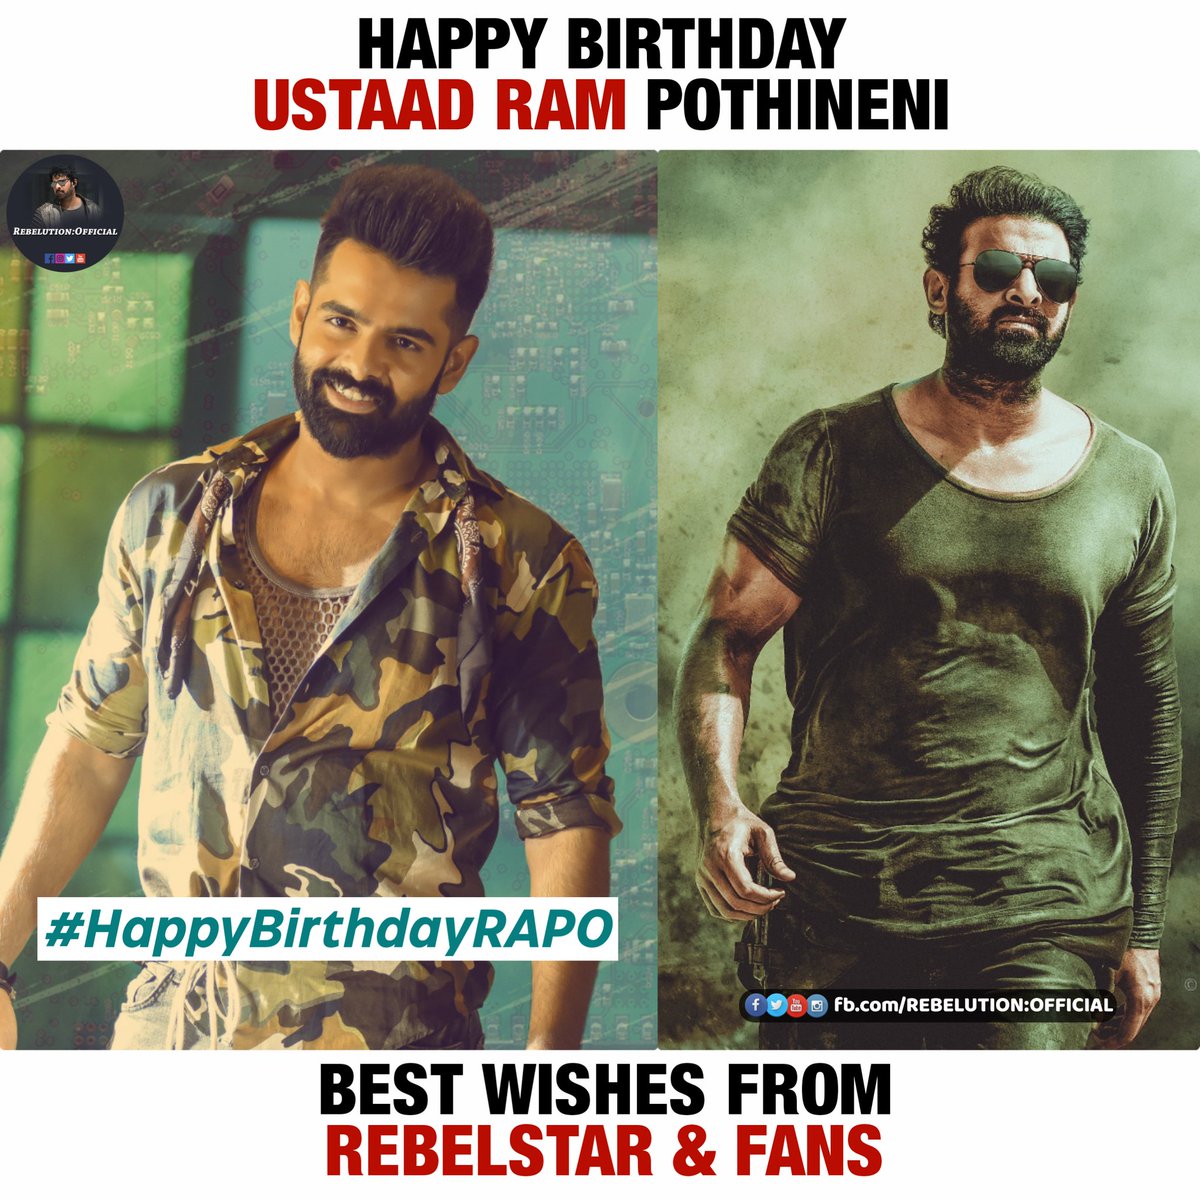 A very very Happy Birthday to you @ramsayz darling... Wish you all the best for #DoubleISMART... Best wishes on Behalf of all #Darling #Prabhas Fans...

#HappyBirthdayRAPO
#HBDRamPothineni #RAmPOthineni #RAPO 

#DoubleISMARTTeaser at 10:03 AM Today.